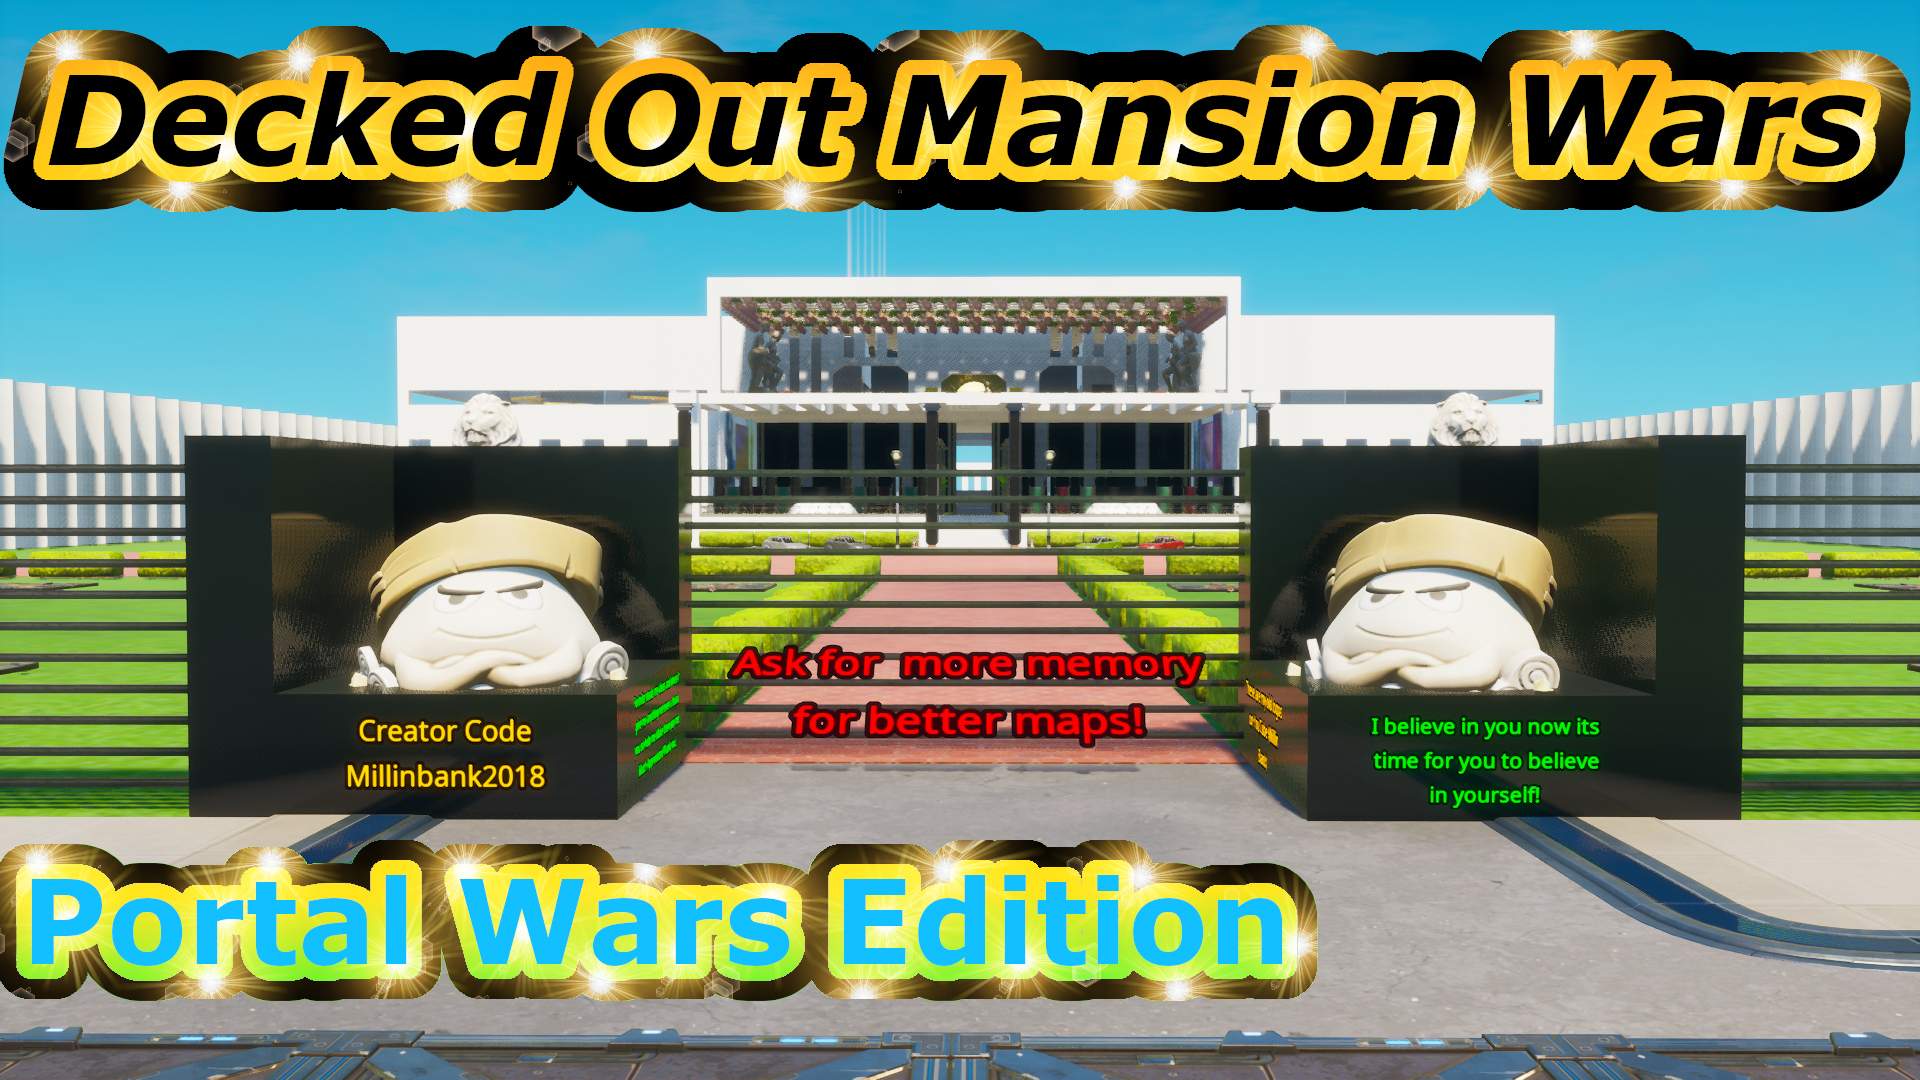 DECKED OUT MANSION WARS!